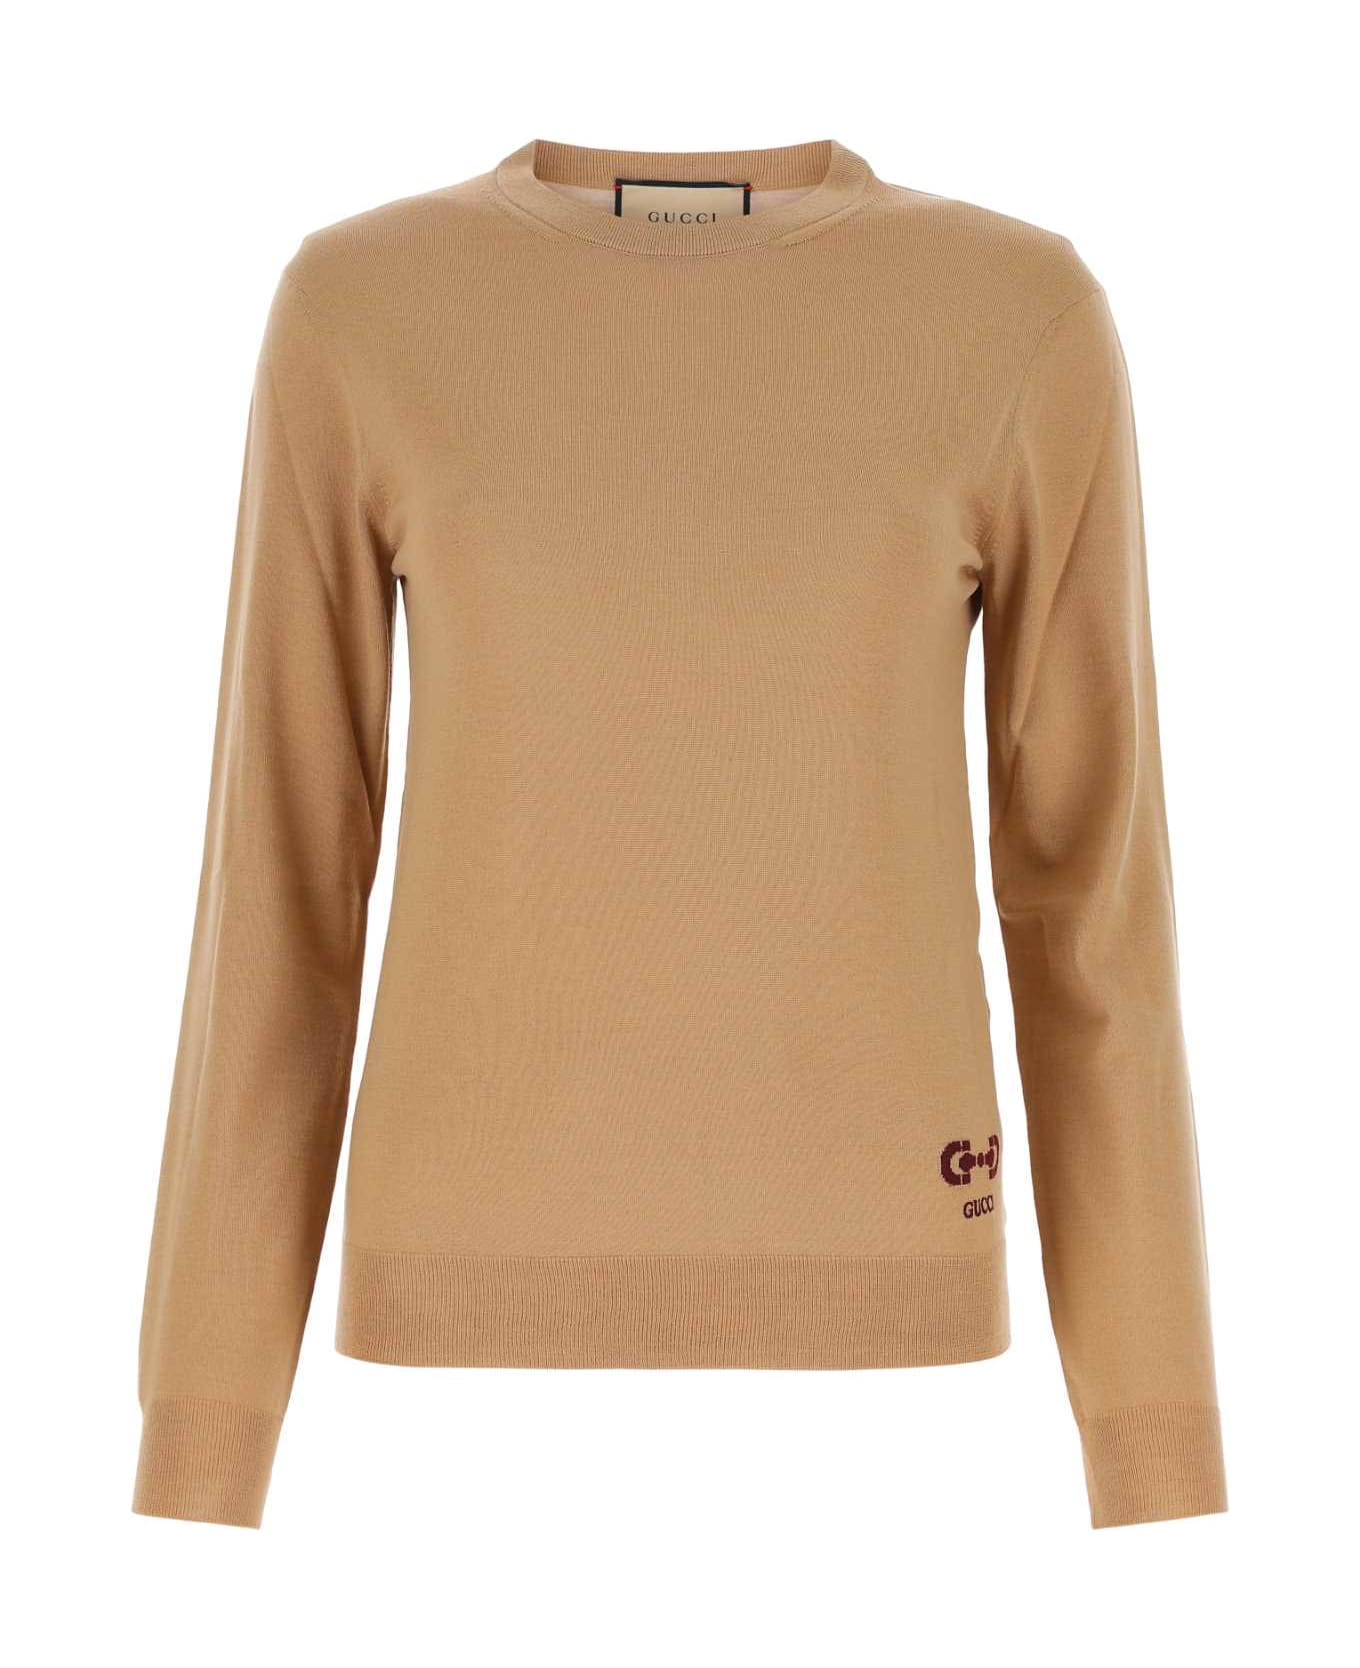 Gucci Camel Wool Sweater - Brown ニットウェア